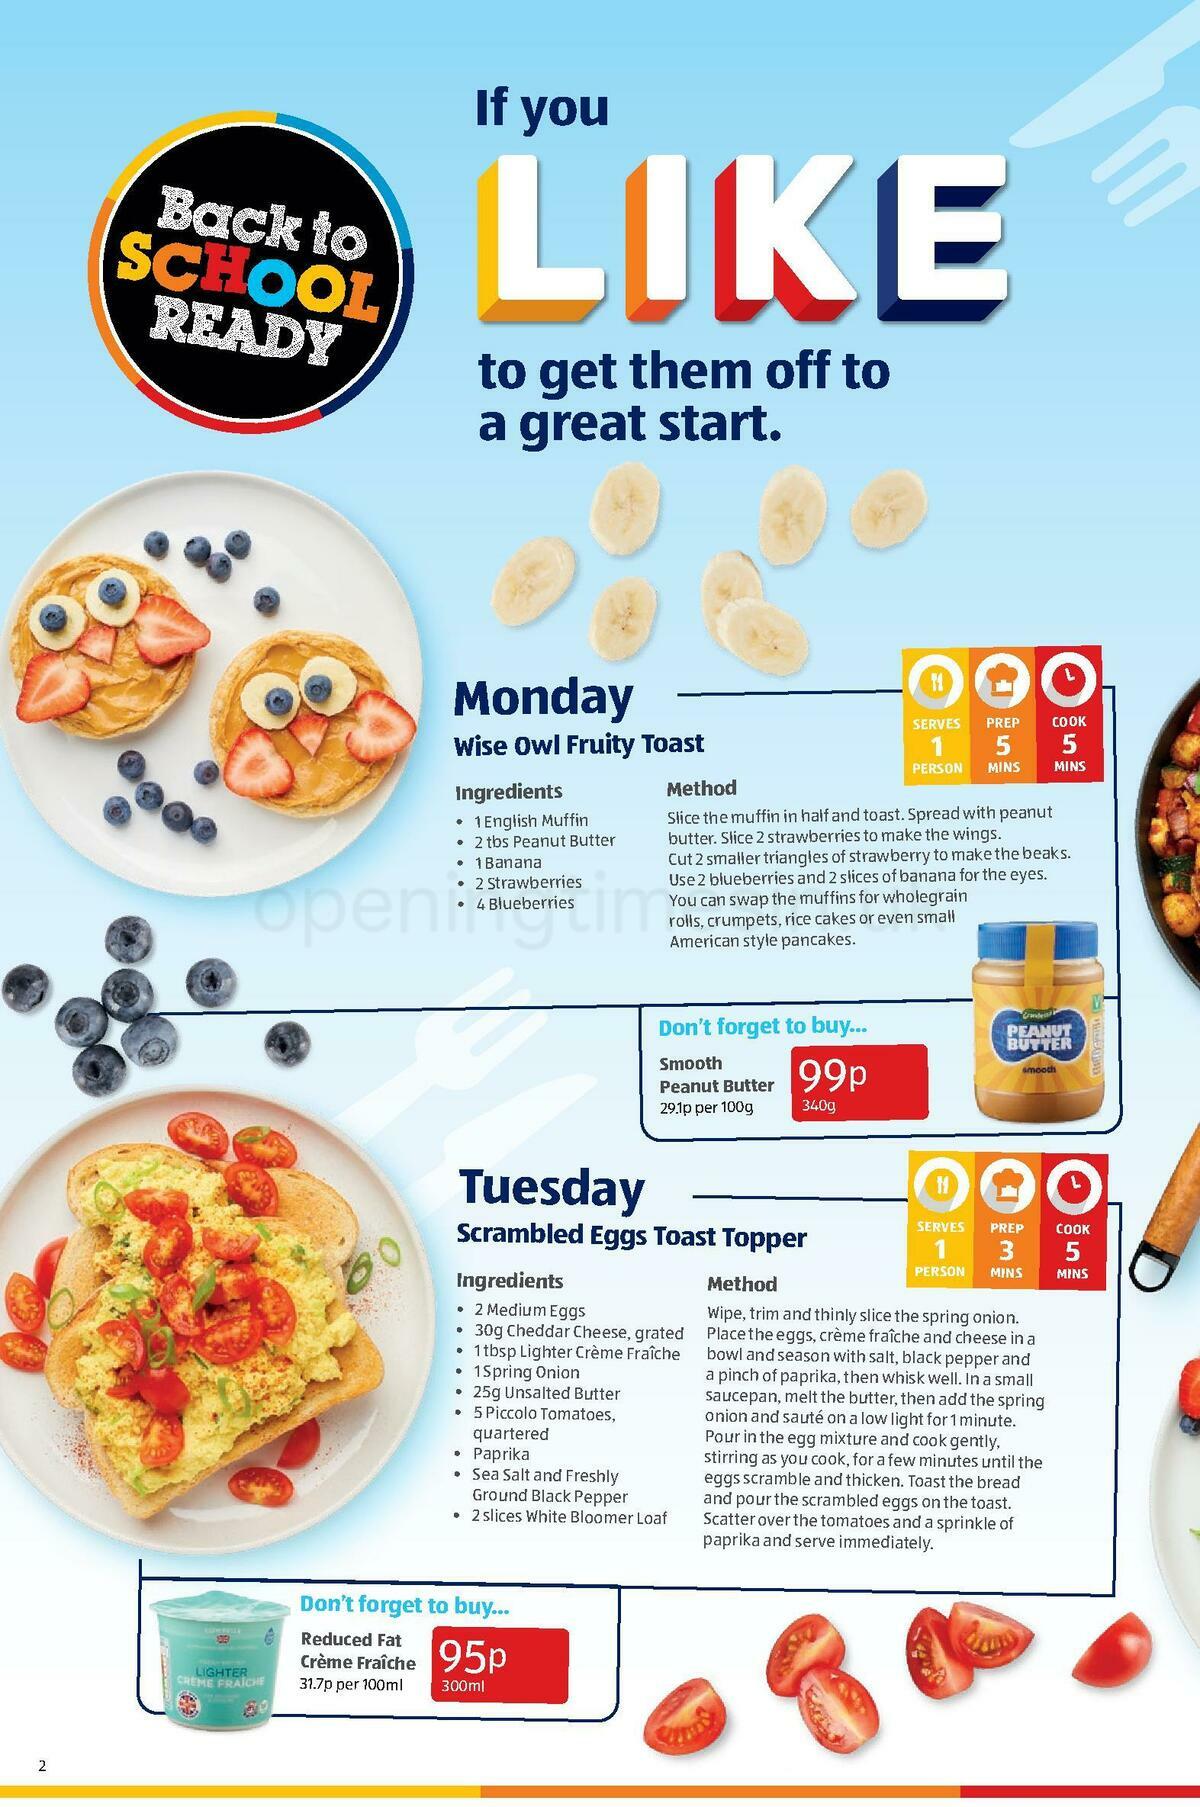 ALDI Offers from 5 September